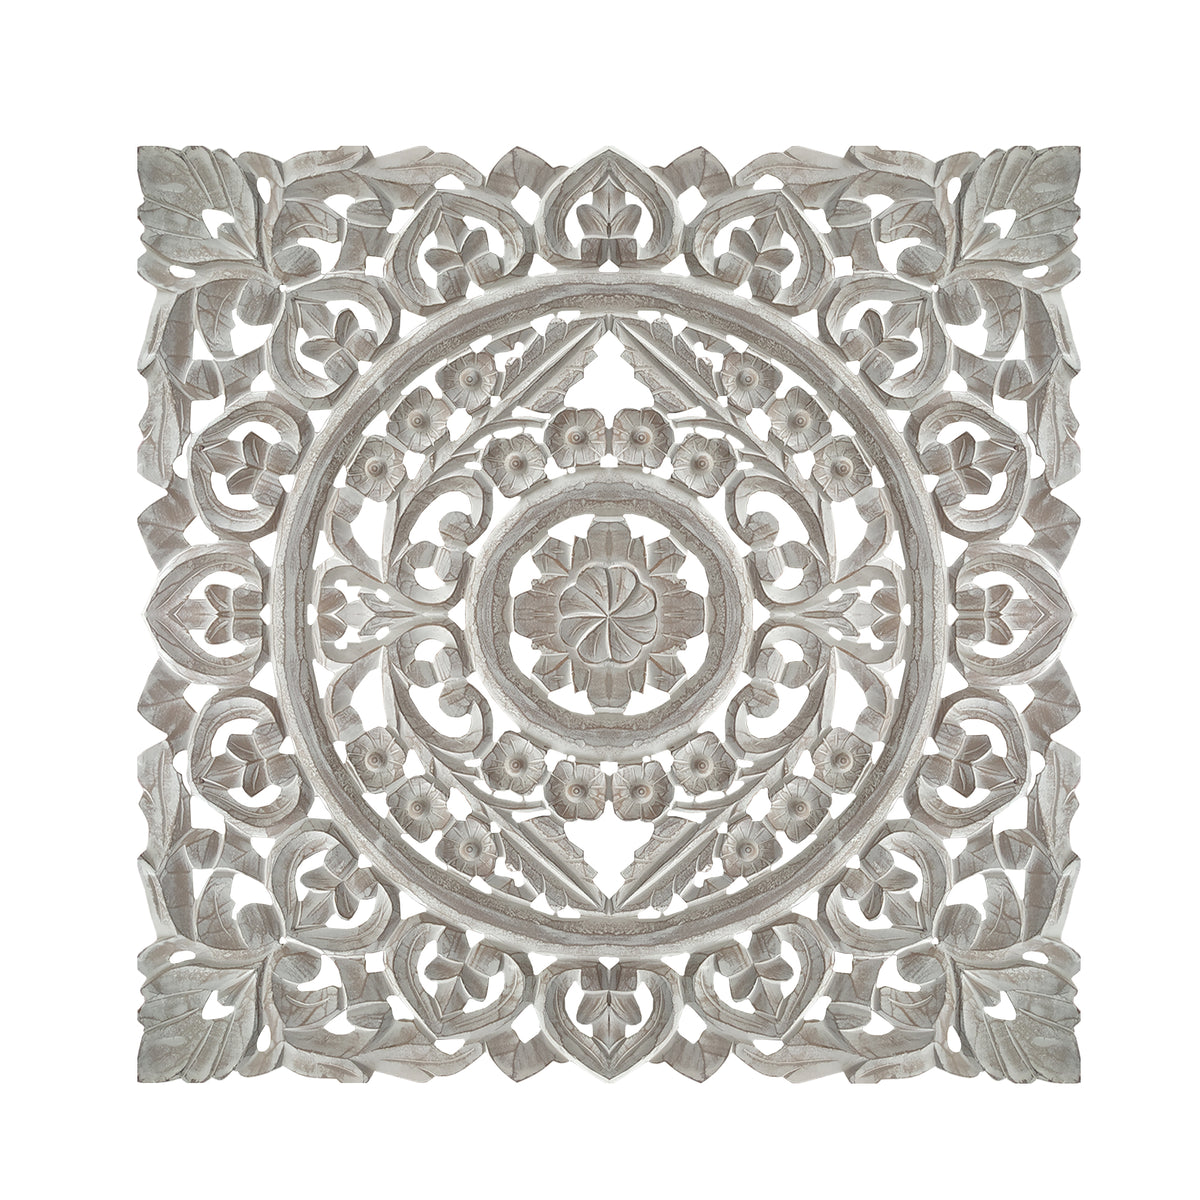 Distressed Square Shape Wooden Wall Panel with Traditional Carvings, White - UPT-200173